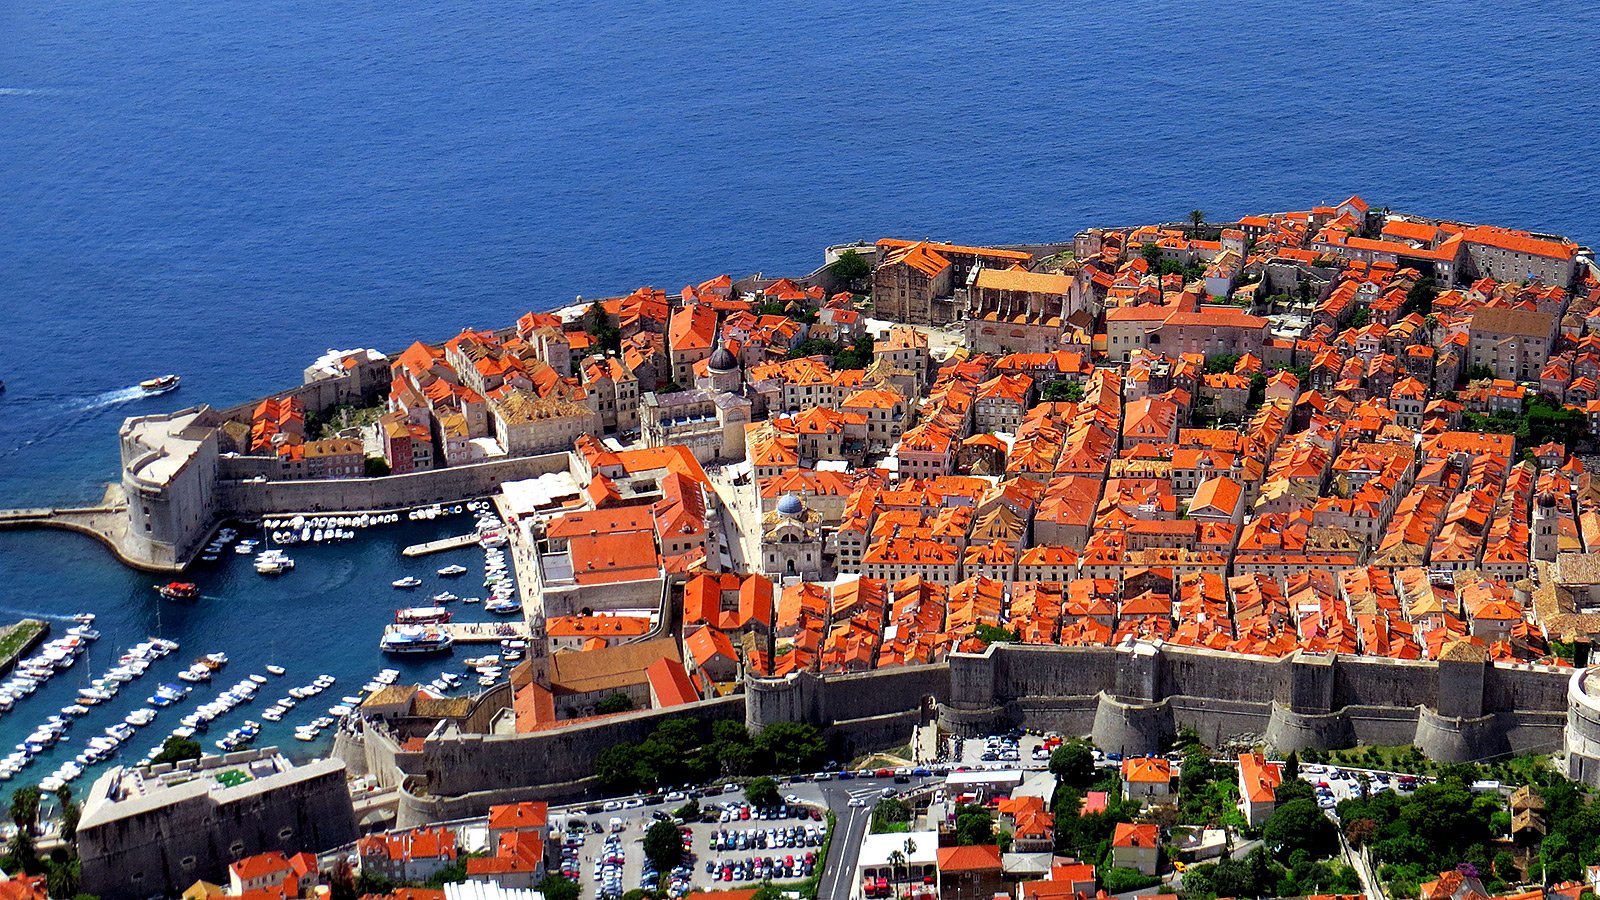 How to climb to the top of the Mount Srdj in Dubrovnik